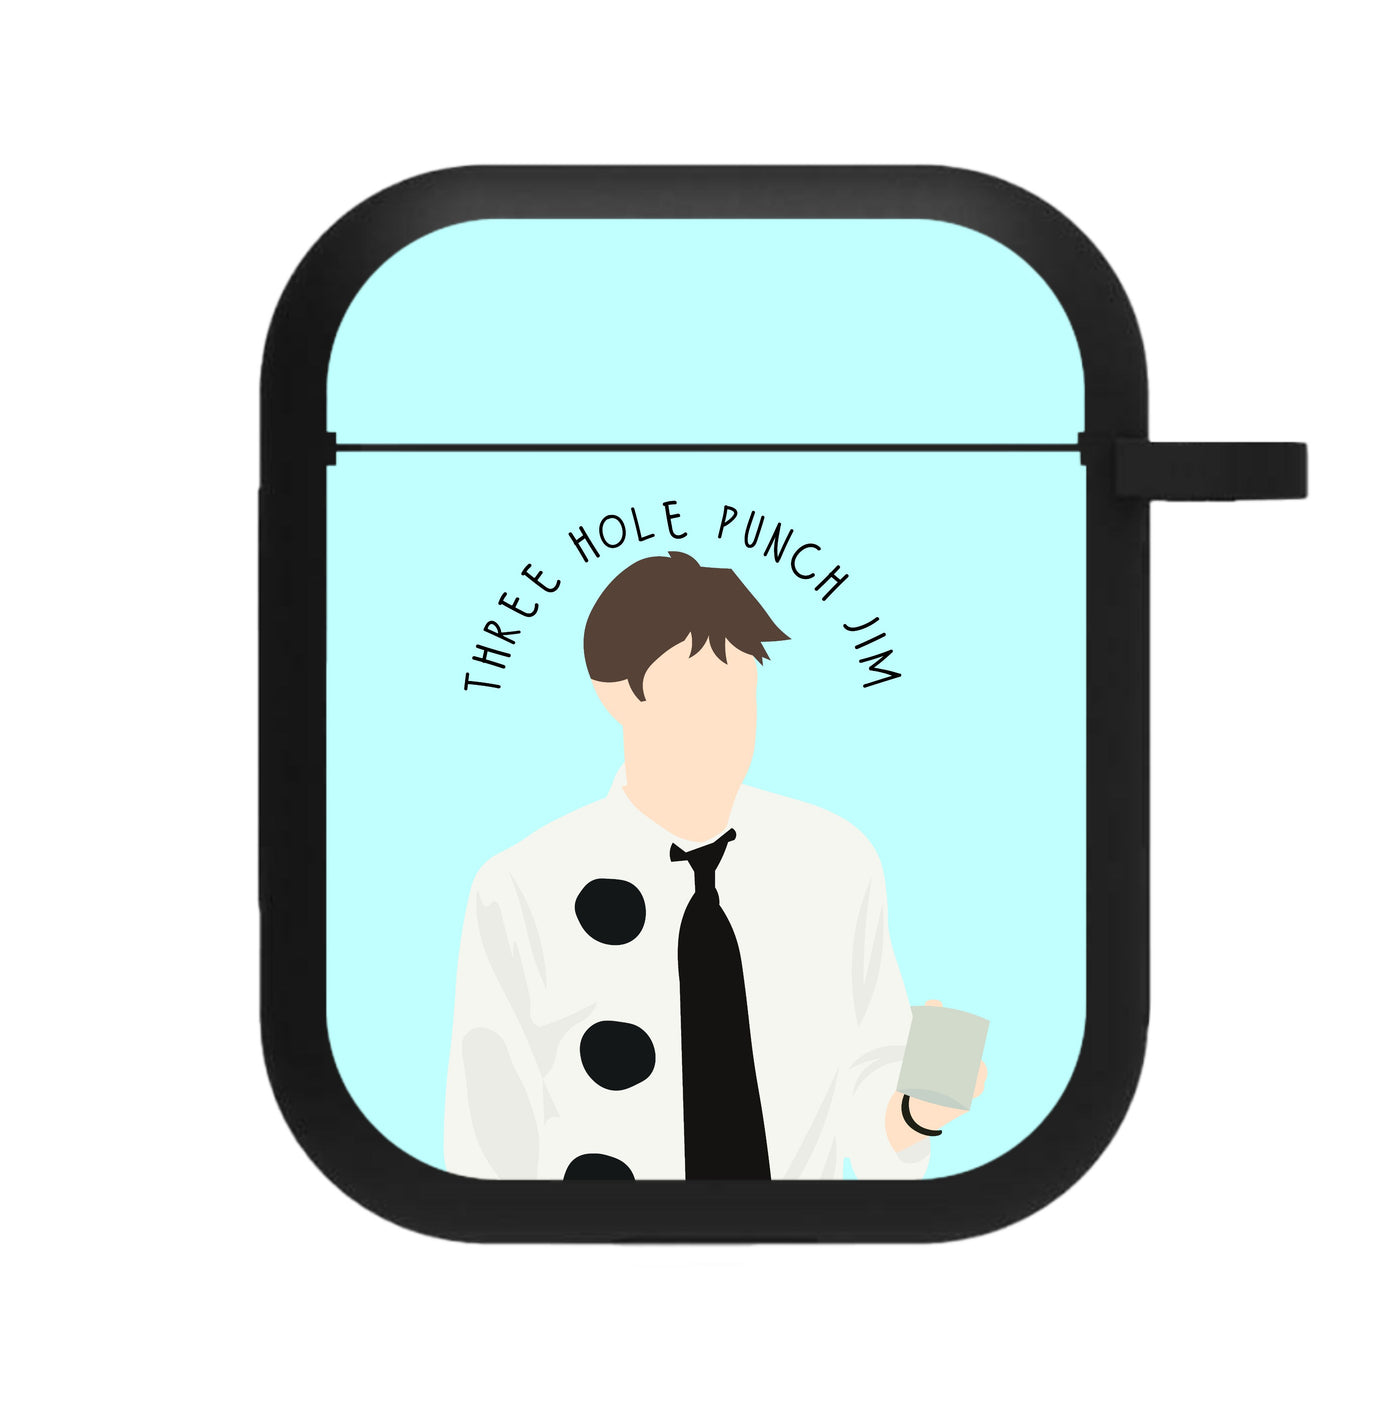 Three Hole Punch Jim The Office - Halloween Specials AirPods Case